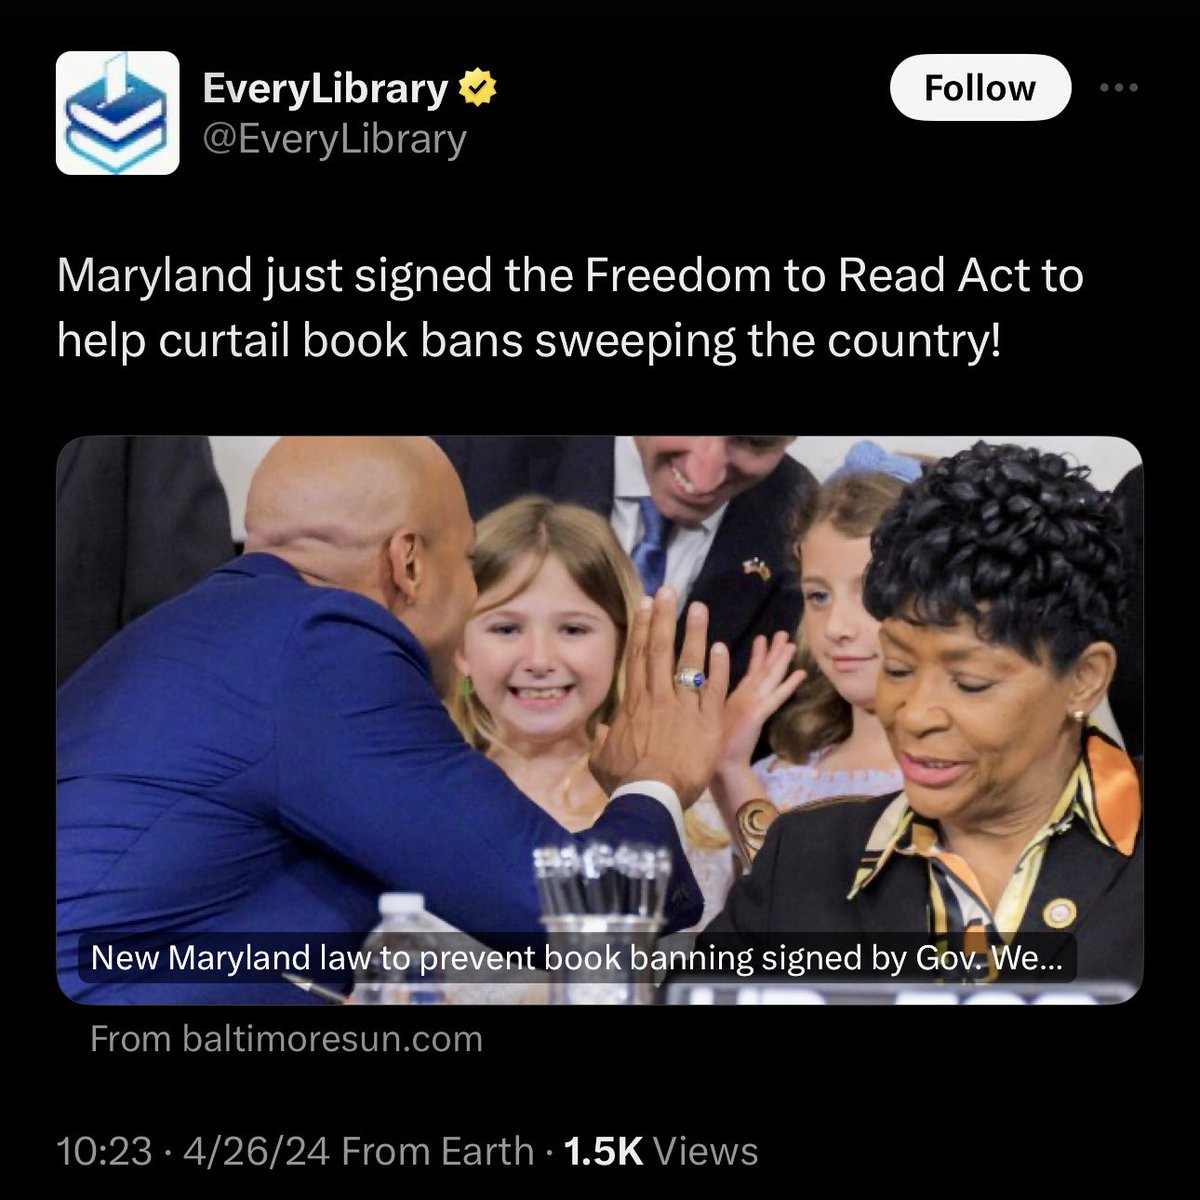 MARYLAND SIGNS INTO LAW CHICAGO’S AMERICAN LIBRARY ASSOCIATION @ALALibrary POLICY THAT IS ILLEGAL AND WILL S3XUALIZE SCHOOL CHILDREN STATEWIDE.

Someone challenge this law. I’ll help.

#mdpol #mdleg #mdpolitics #parenting #moms #dads @MDGOP

Freedom to Read Act is the opposite.